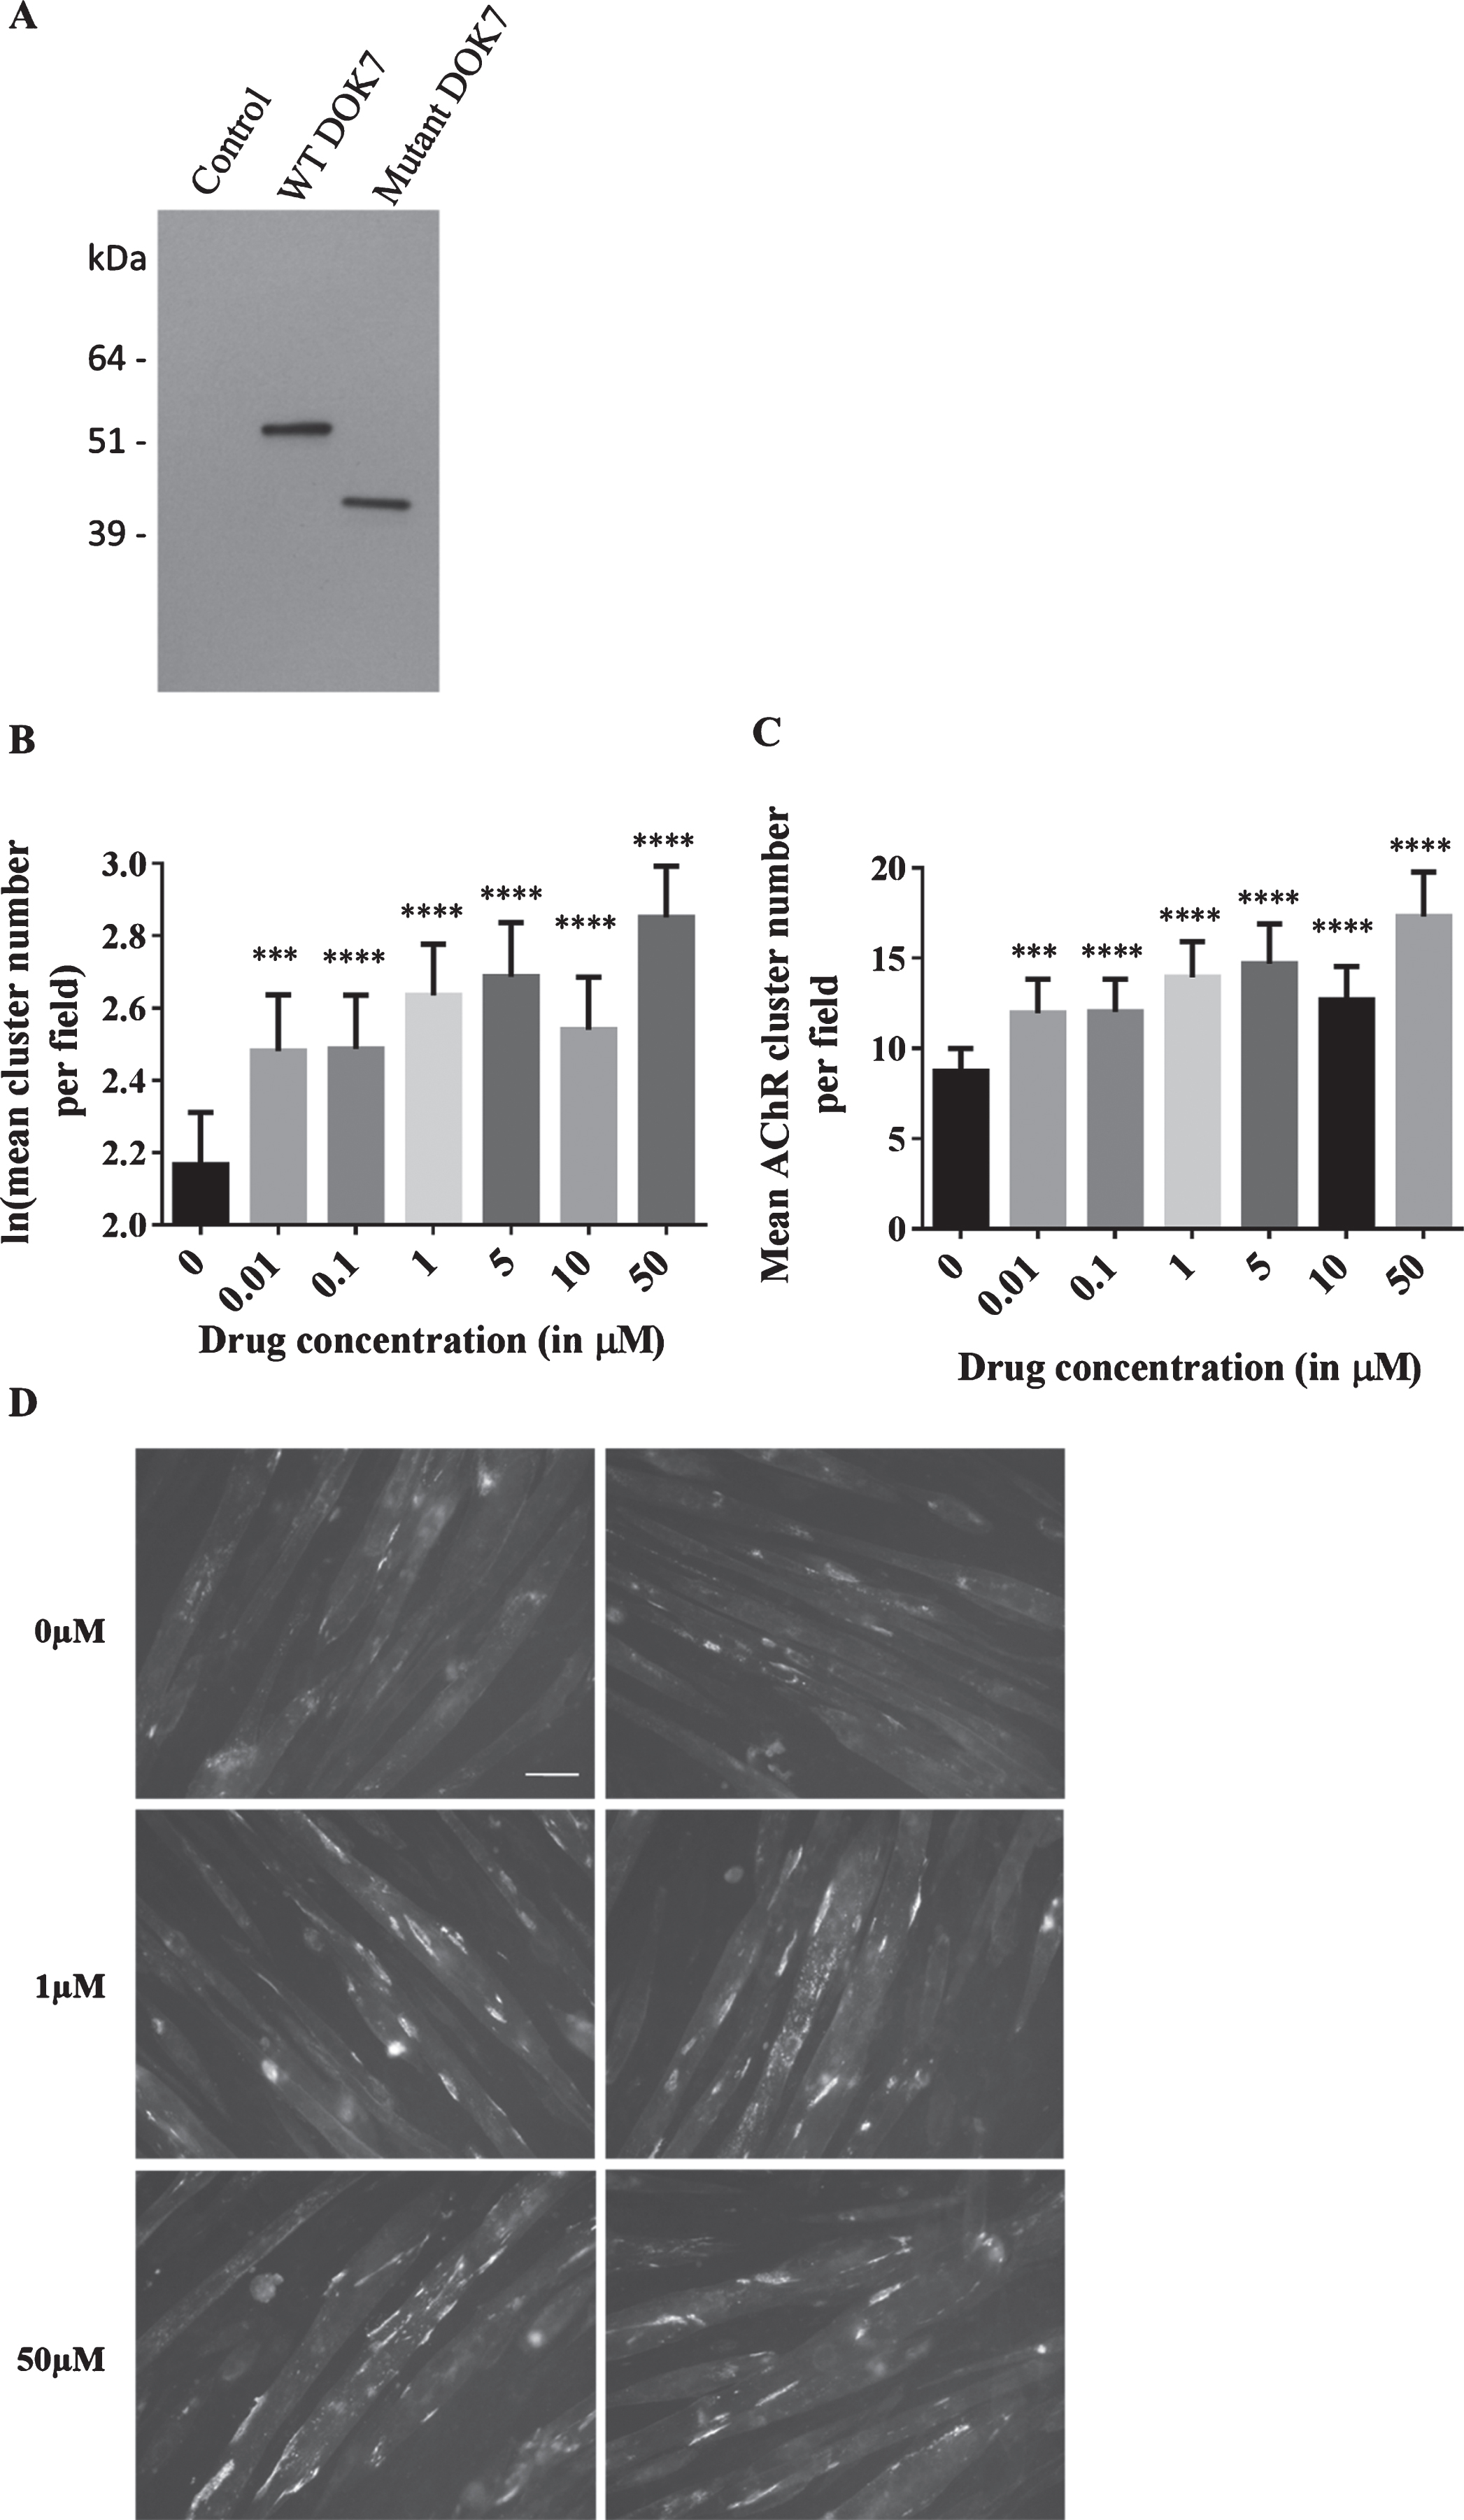 Effects of salbutamol sulphate on AChR clustering in C2C12DOK7c. 1124 _ 27dupTGCC cells. (A) C2C12DOK7c. 1124 _ 27dupTGCC and C2C12DOKWT myotubes robustly express DOK7 compared with control myotubes infected with pBABE-PURO-EGFP. Myotube lysates were analysed by western blot using anti-DOK7 antibody H-284 (Santa Cruz) 1:500..  (B-D) C2C12DOK7c. 1124 _ 27dupTGCC myotubes were incubated with 0.01, 0.1, 1, 5, 10 or 50 μM salbutamol sulphate for 22 h. (B) Salbutamol sulphate treatment induced a significant increase in the number of clusters at all concentrations tested (difference = 0.31, SE = 0.08, p = 0.001, difference = 0.32, SE = 0.07, p = 0.00002, difference = 0.47, SE = 0.05, p < 0.00005, difference = 0.52, SE = 0.07, p < 0.00005, difference = 0.37, SE = 0.06, p < 0.00005, and difference = 0.68, SE = 0.05, p < 0.00005, respectively). (C) Data back-transformed into cluster numbers. (D) Representative microscopic images of C2C12DOK7c. 1124 _ 27dupTGCC myotubes treated with salbutamol sulphate as indicated. N = 12. Error bars indicate the standard error of the mean. n.s.p > 0.05 ***p≤0.001, ****p≤0.0001.